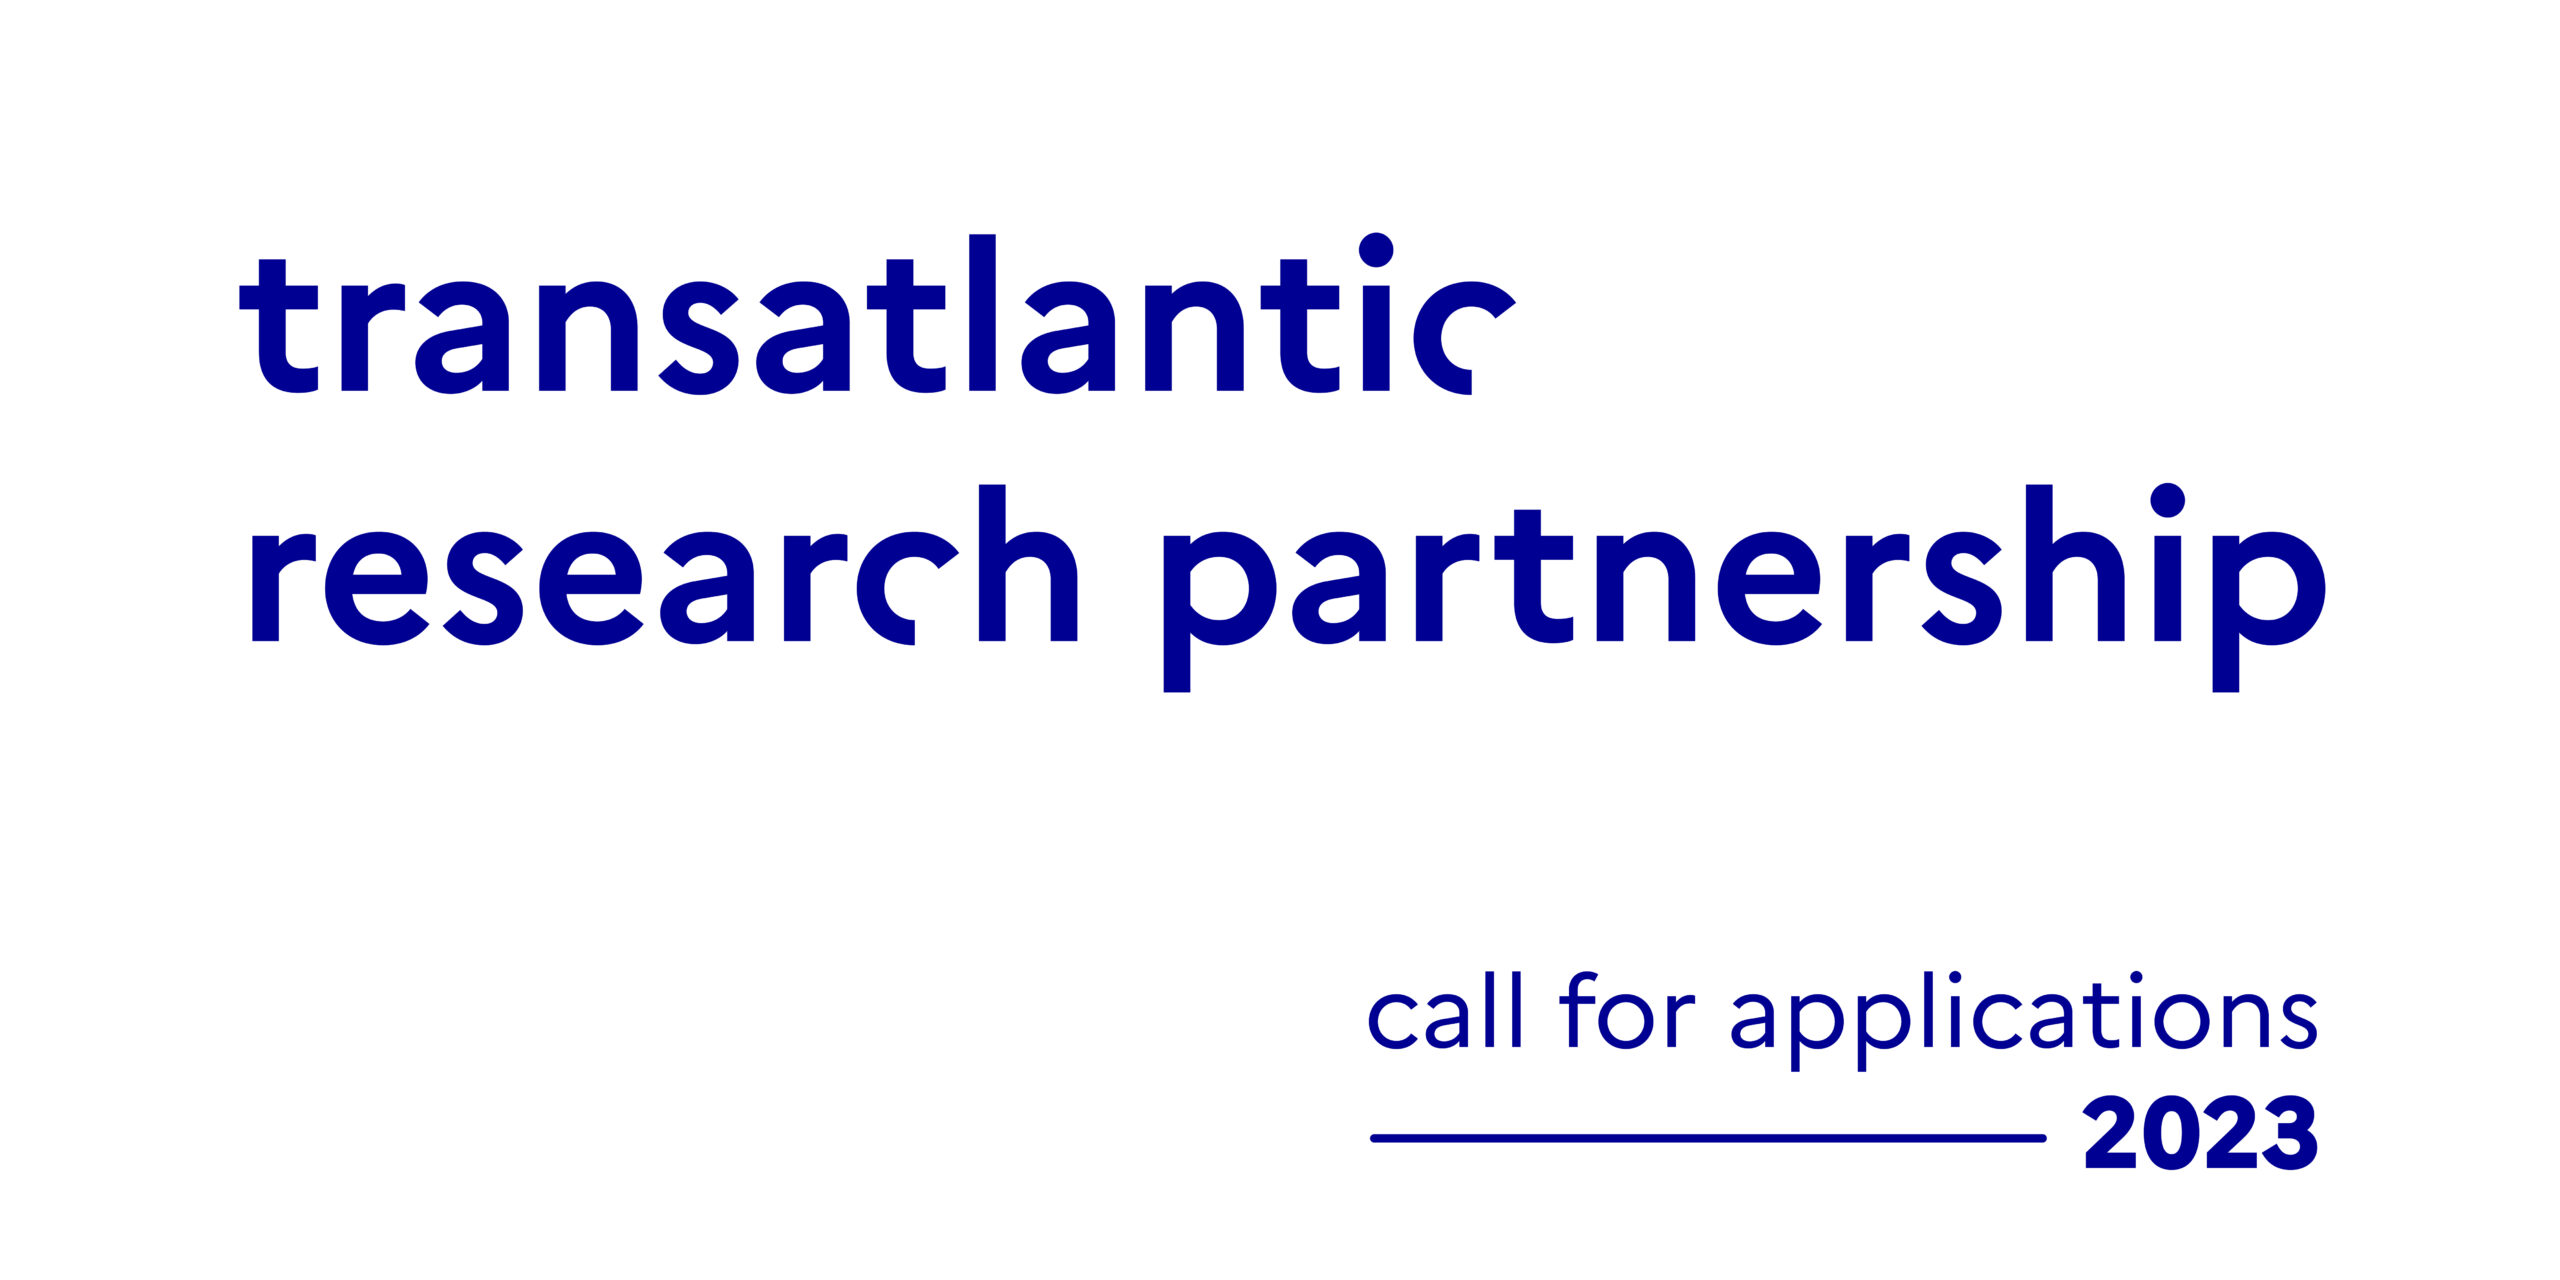 Call for applications Transatlantic Research Partnership 2023 is now opened